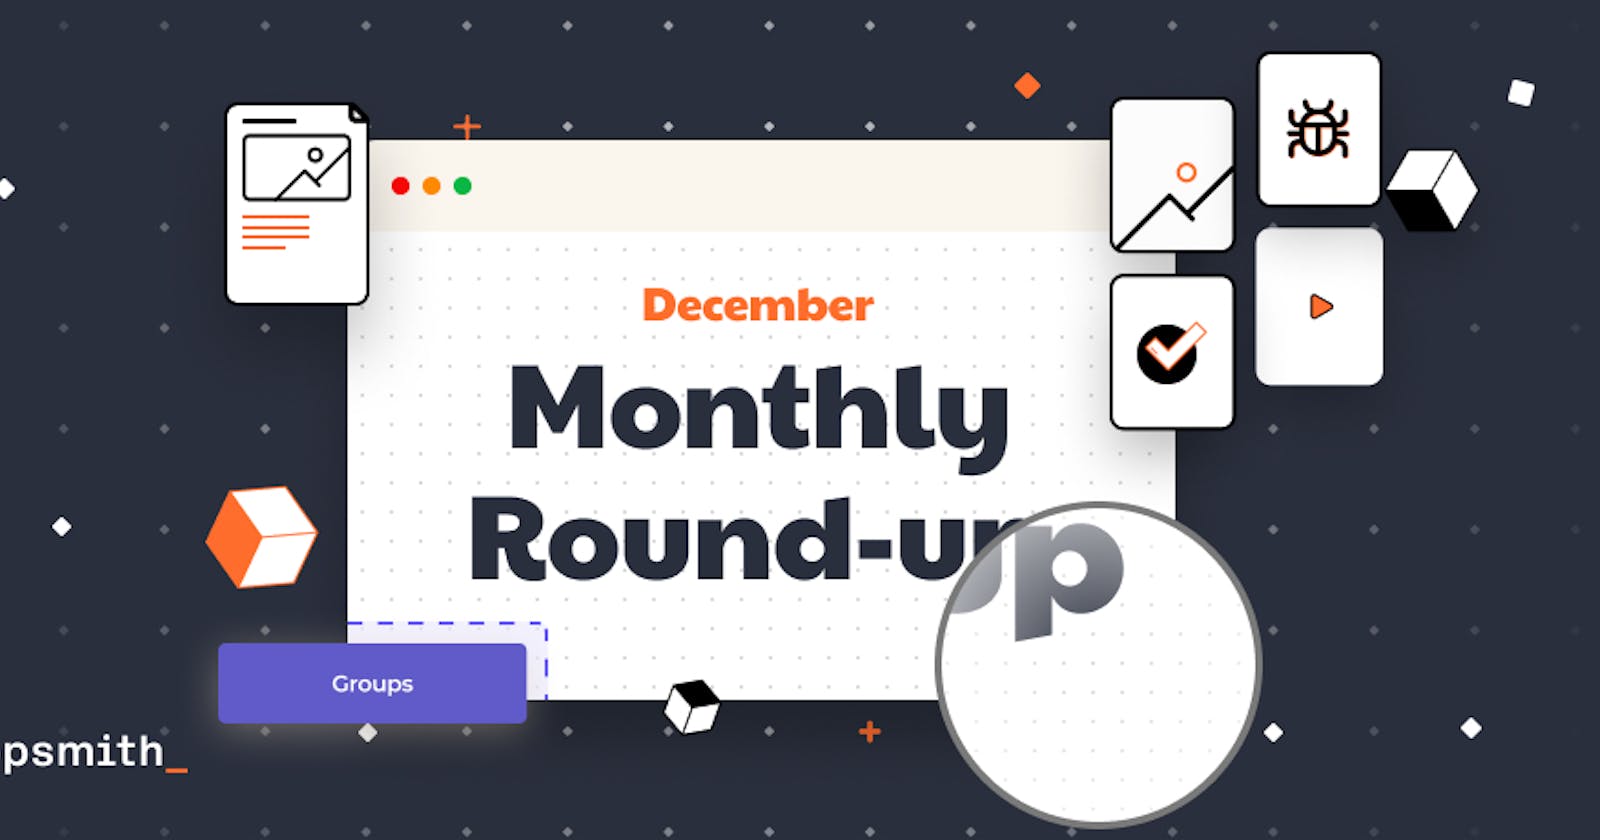 December Round-up: Docked Property Pane, Switch Group, Document Viewer Widgets, Admin Page Settings!